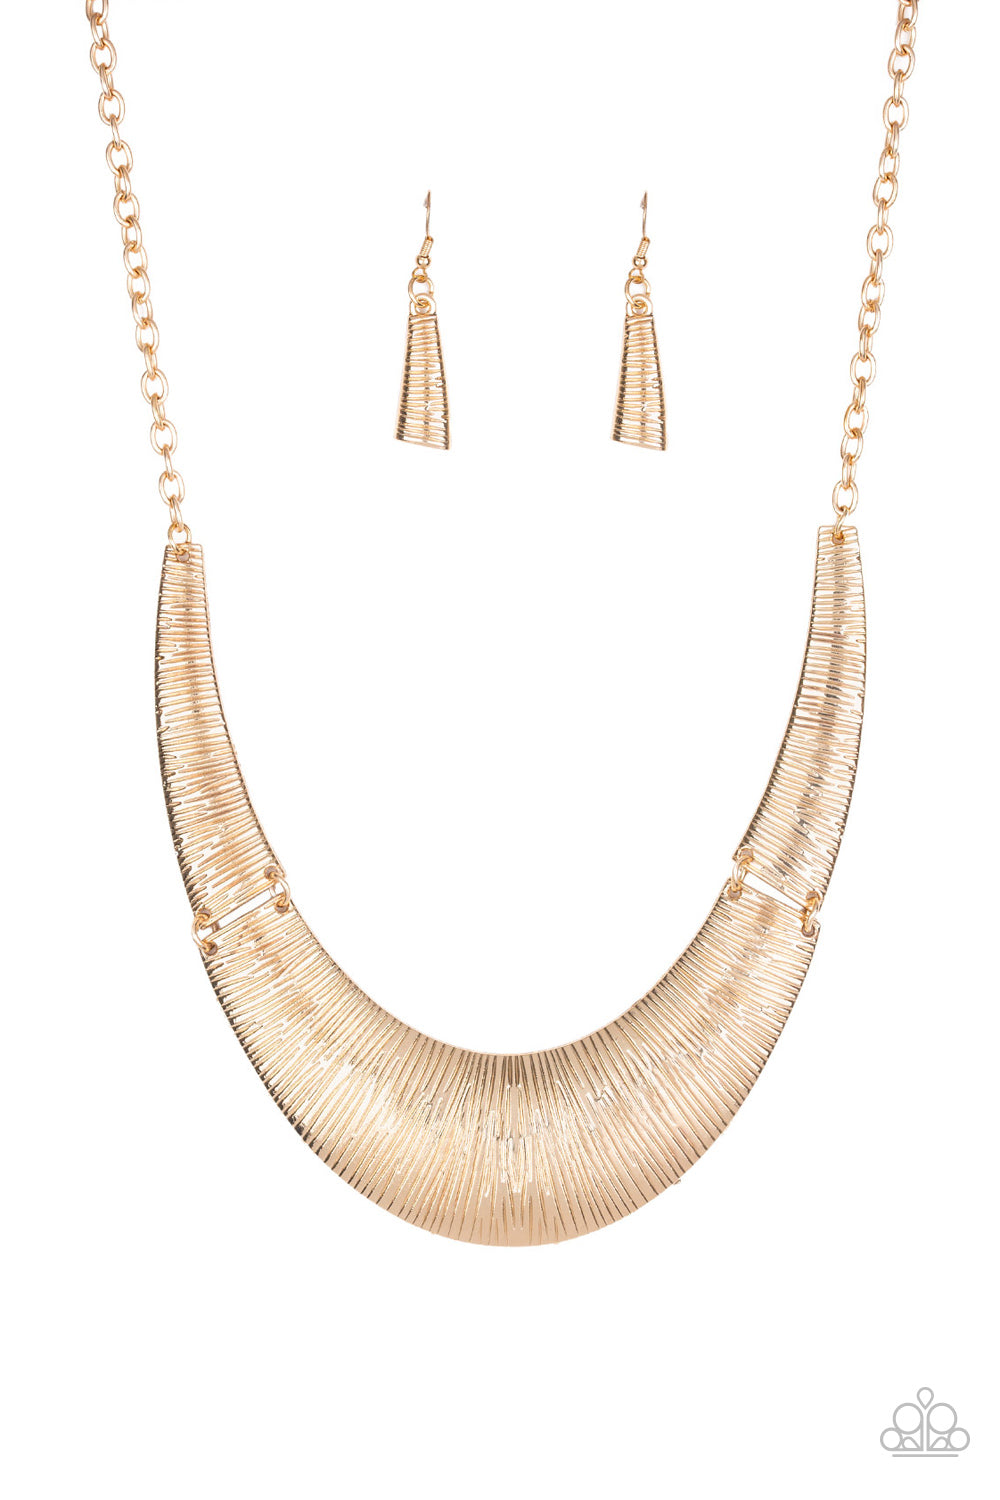 Feast or Famine - Gold Necklace Set